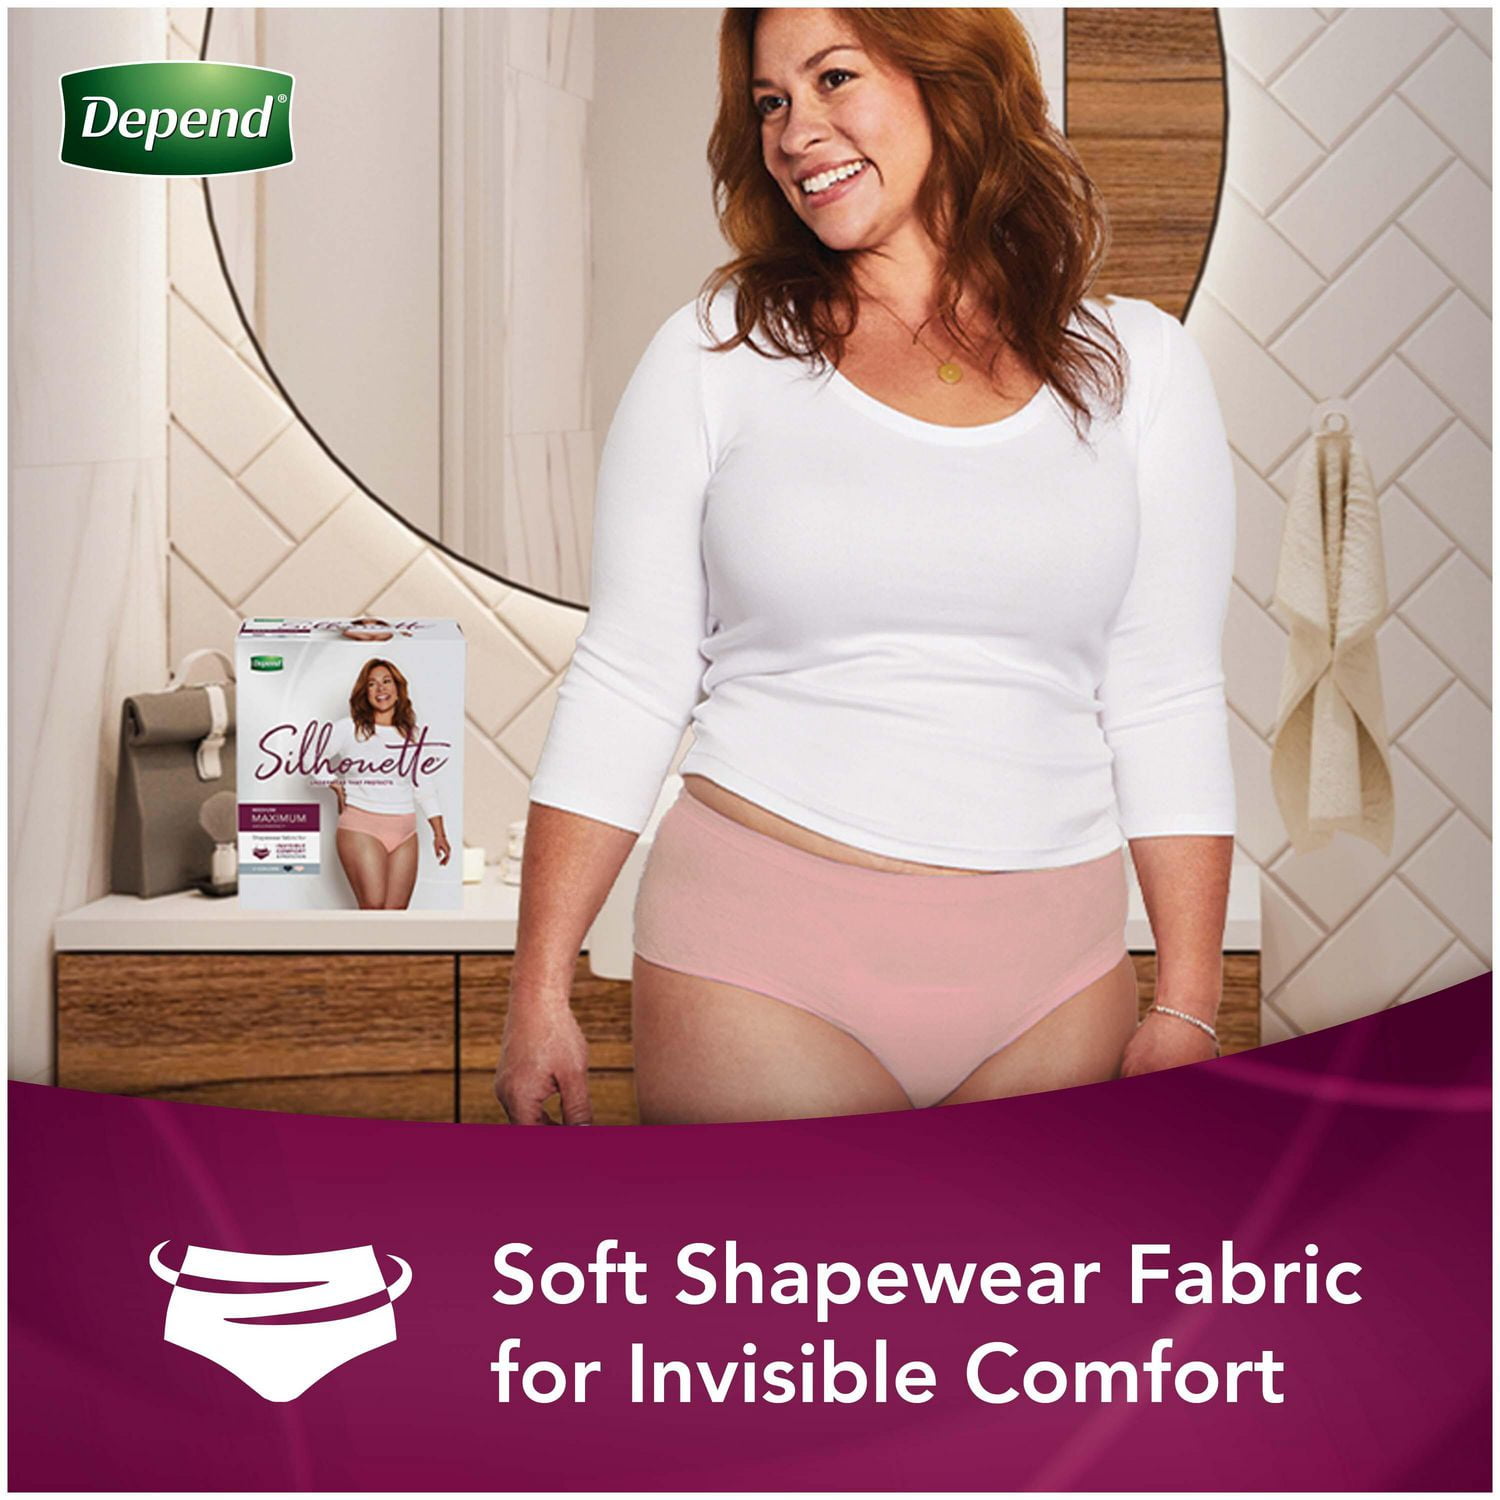 Buy Depend Silhouette Adult Incontinence and Postpartum Underwear